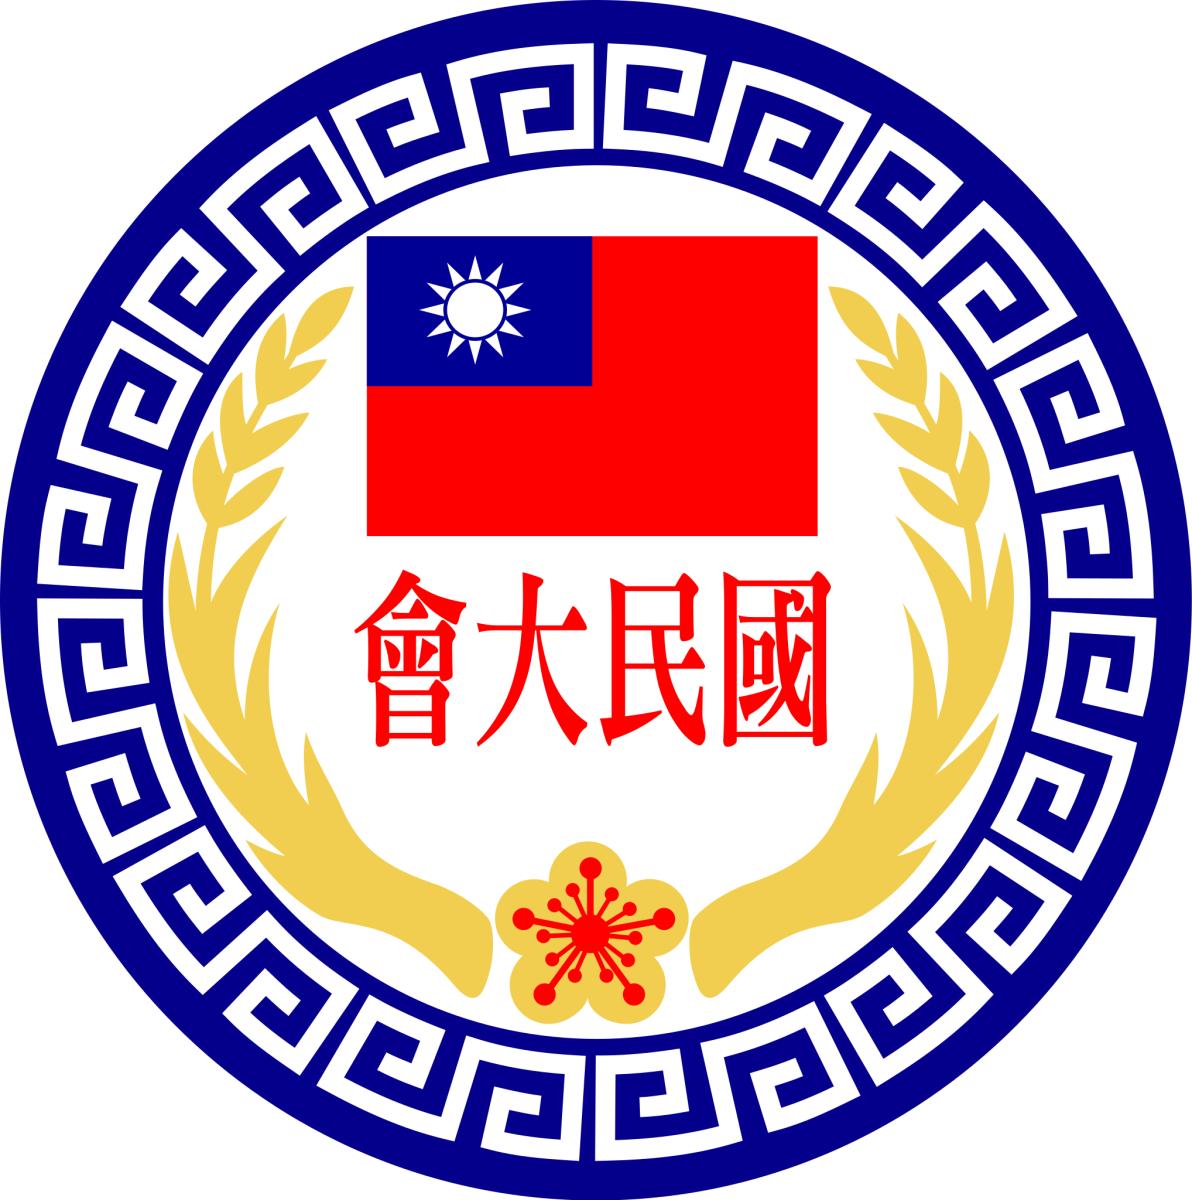 Seal_of_the_National_Assembly,Republic_of_China_(ROC).svg.png.jpg